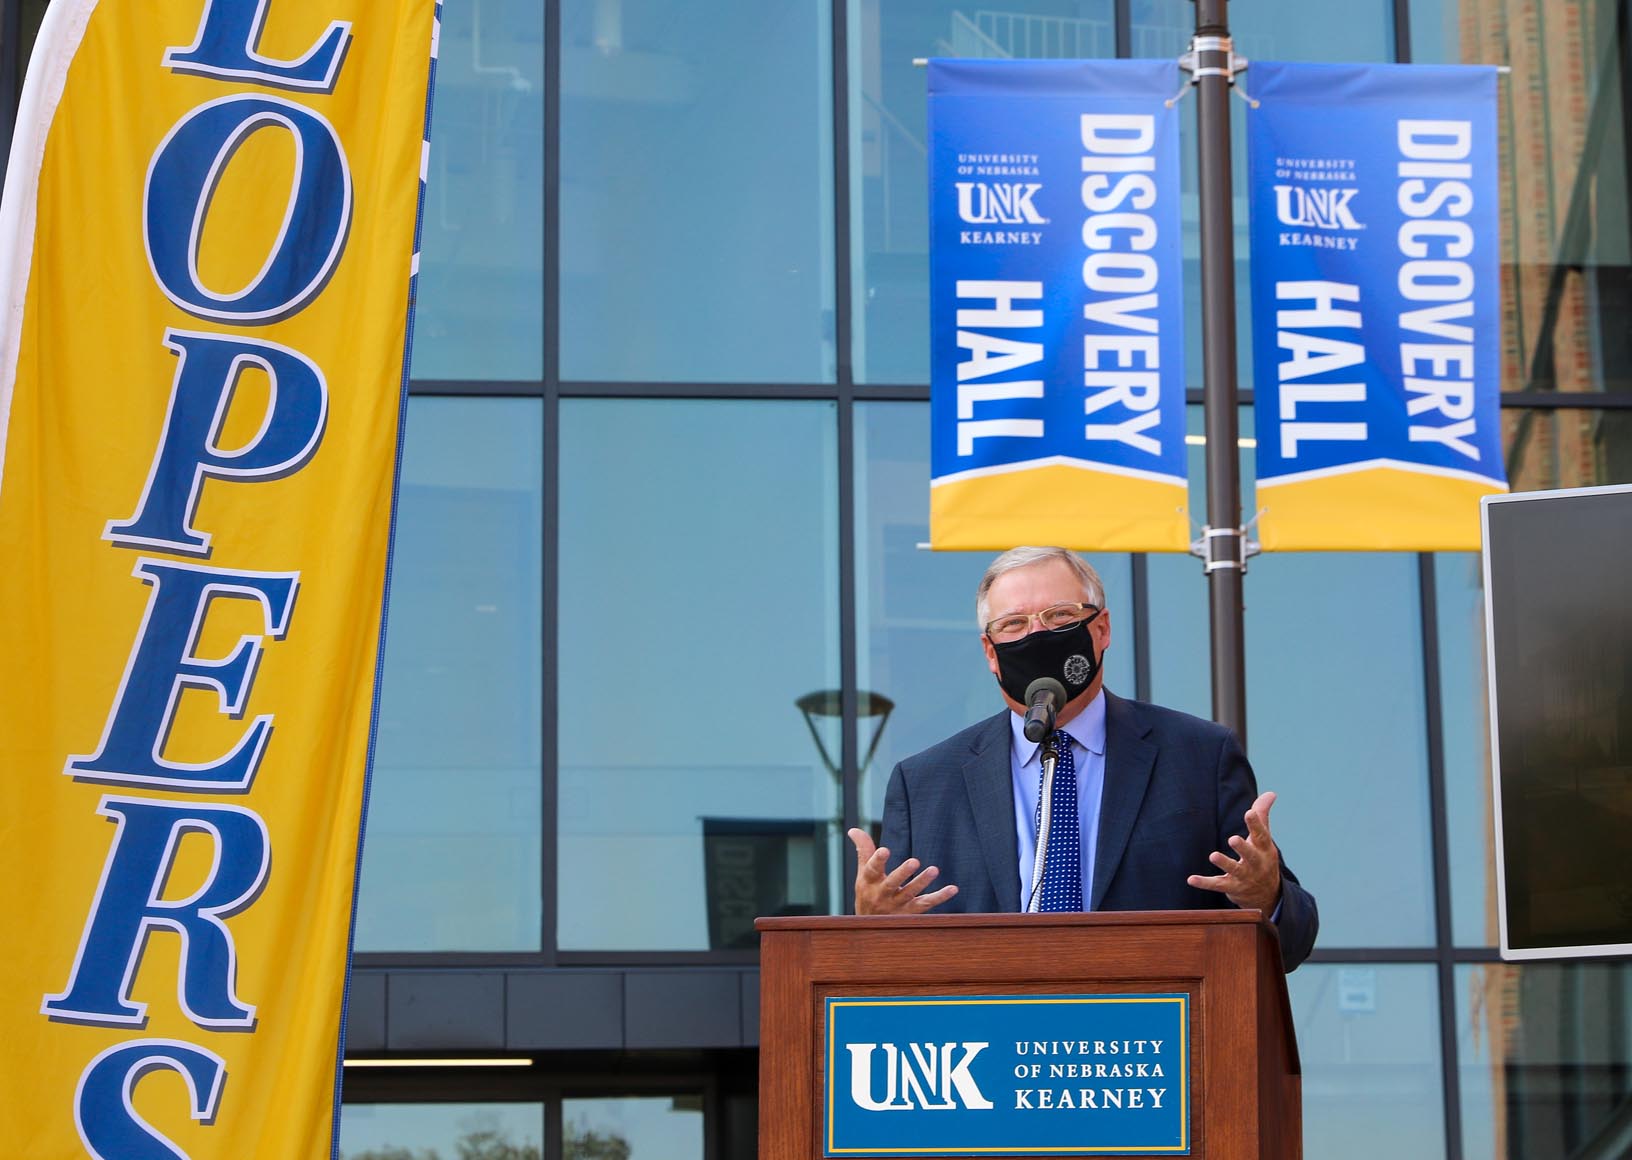 Chancellor Doug Kristensen speaks during Monday’s ribbon-cutting ceremony celebrating the grand opening of Discovery Hall, a 90,000-square-foot STEM facility located on UNK’s west campus. (Photos by Todd Gottula, UNK Communications)